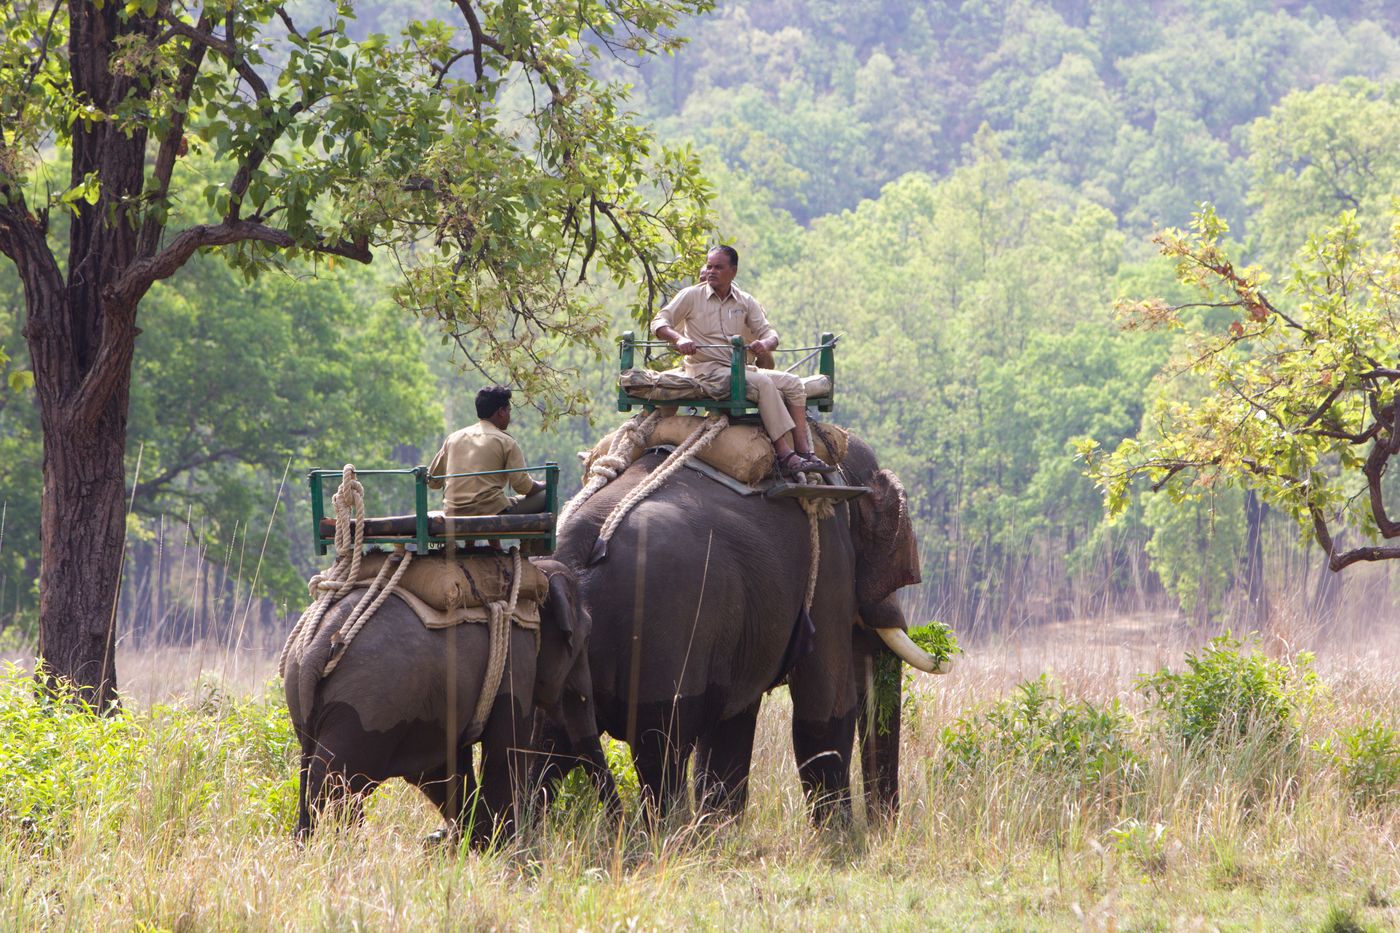 Asian elephants are used to help track Bengal tigers in the Bandhavgarh Tiger Reserve. 